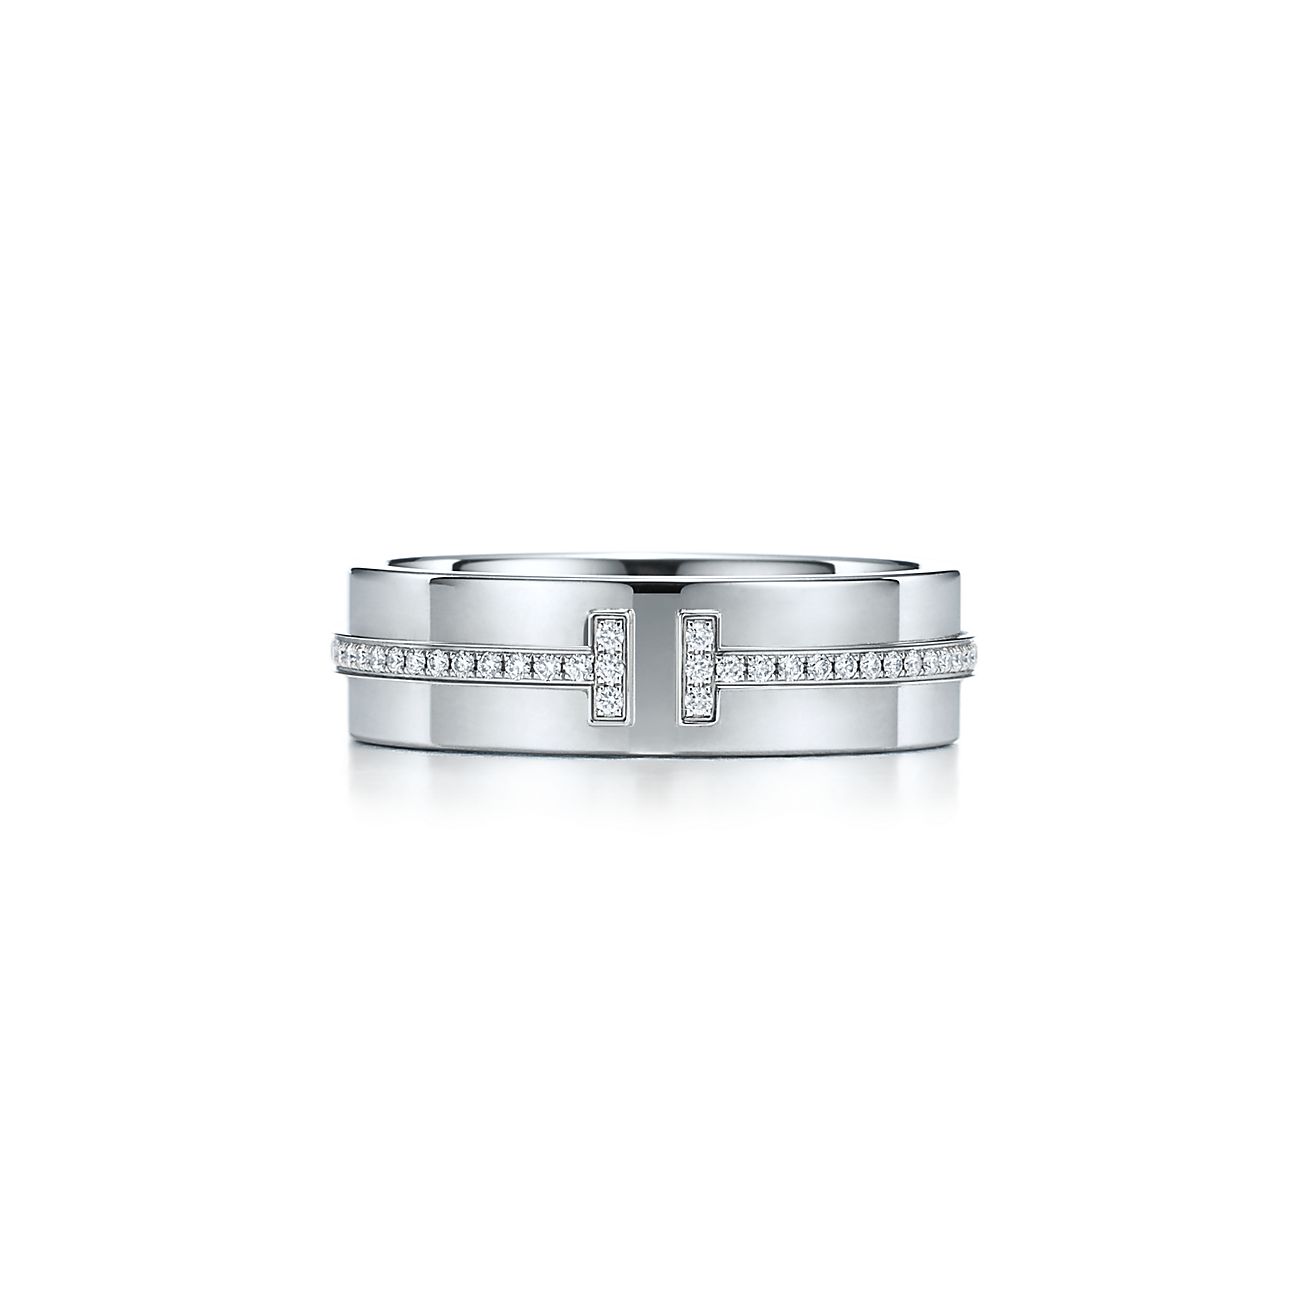 Tiffany T wide diamond ring in 18k white gold, 5.5 mm wide. | Tiffany & Co.